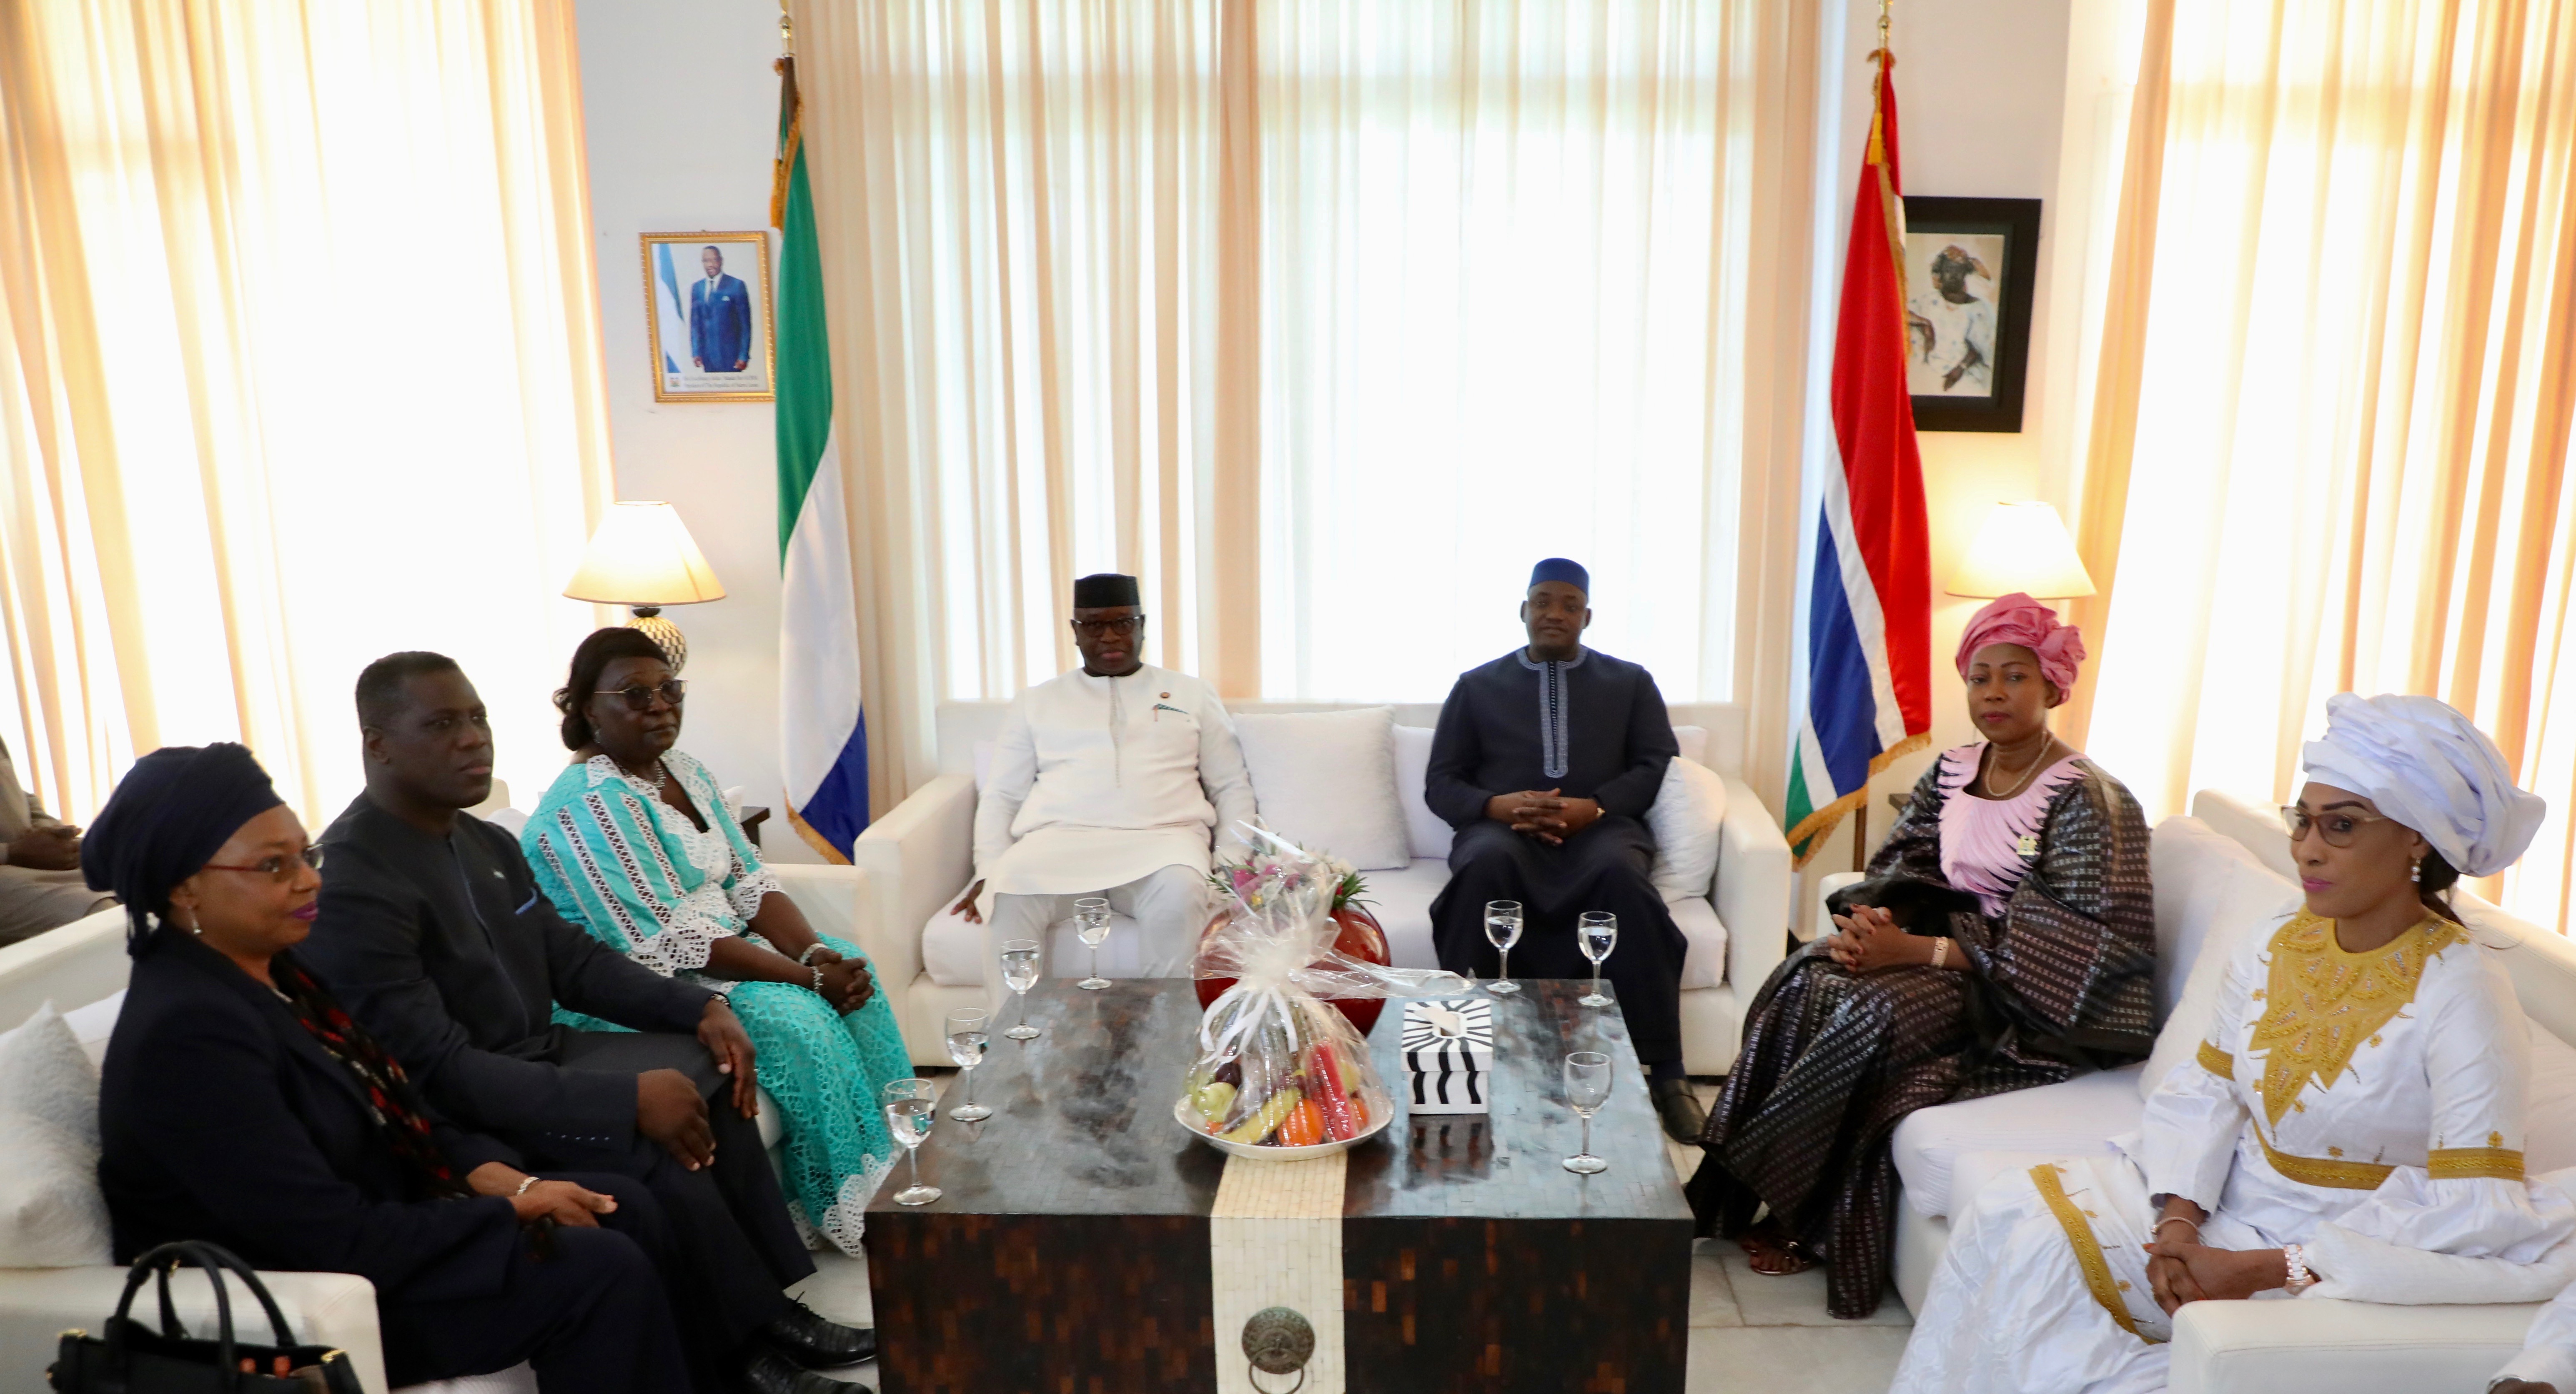 President Barrow and First Lady welcome Sierra Leonean First Family, their Excellencies Julius Maada Bio and Madam Fatima Bio for a 3-day visit to Banjul